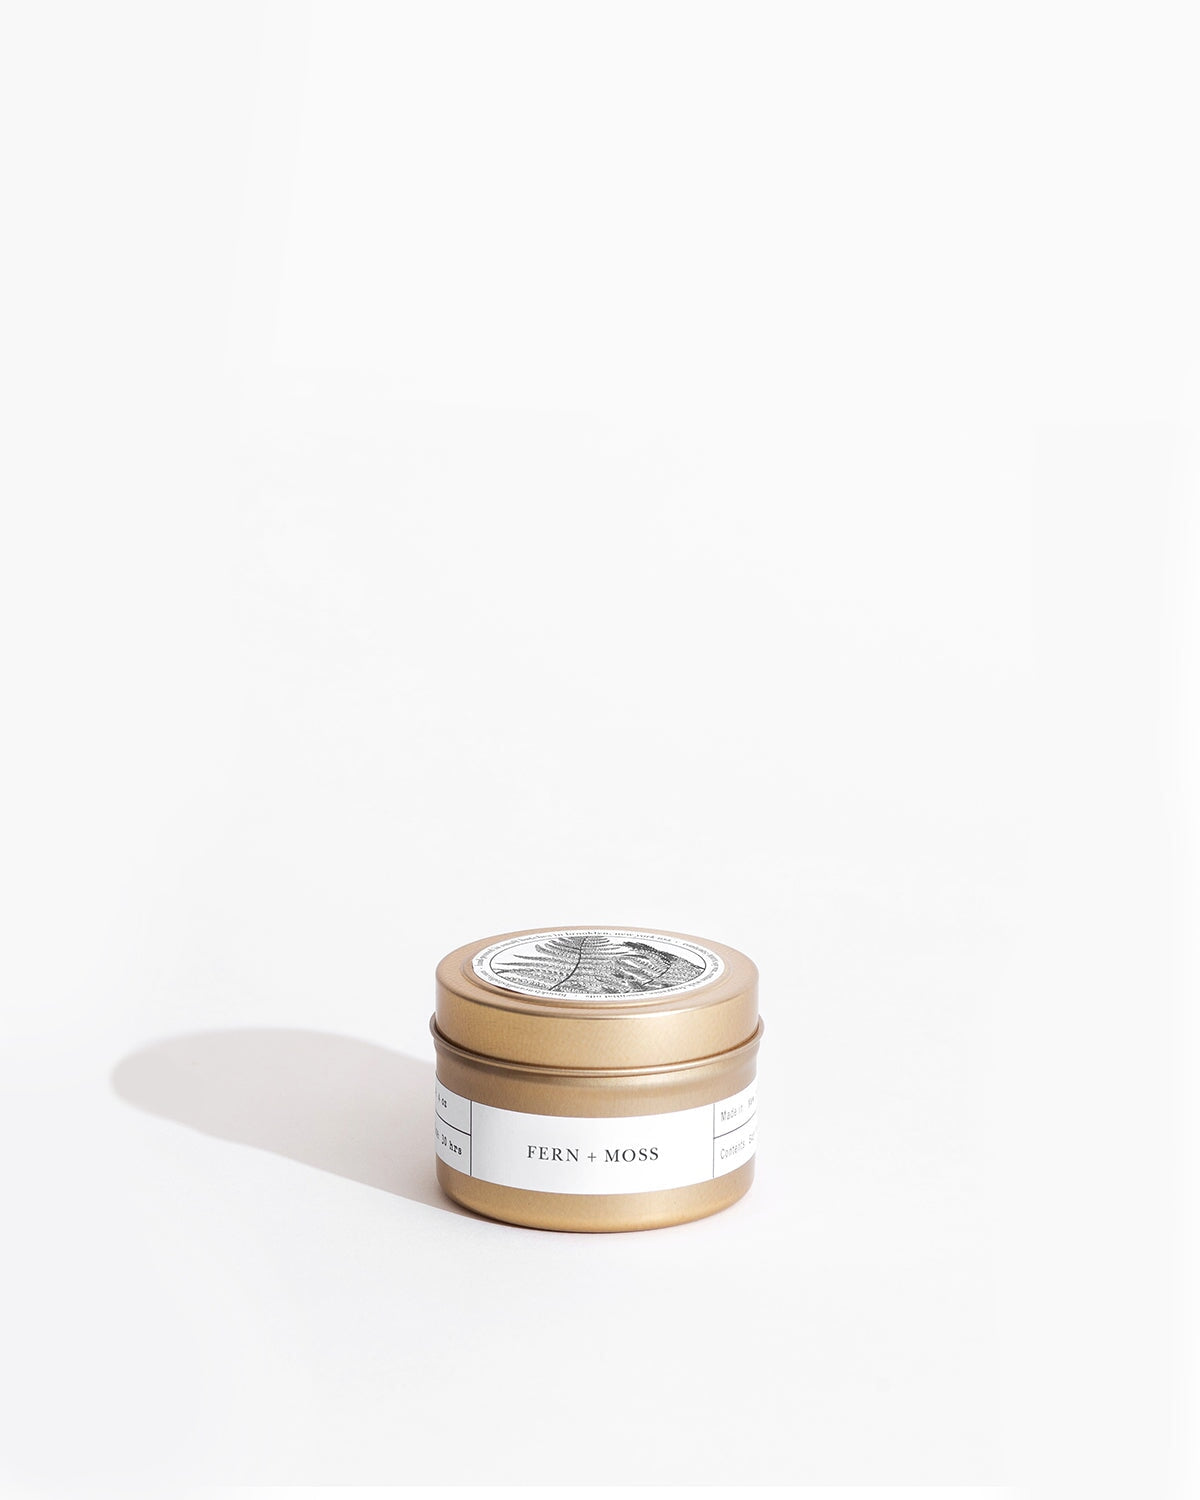 Fern + Moss Gold Travel Candle by Brooklyn Candle Studio